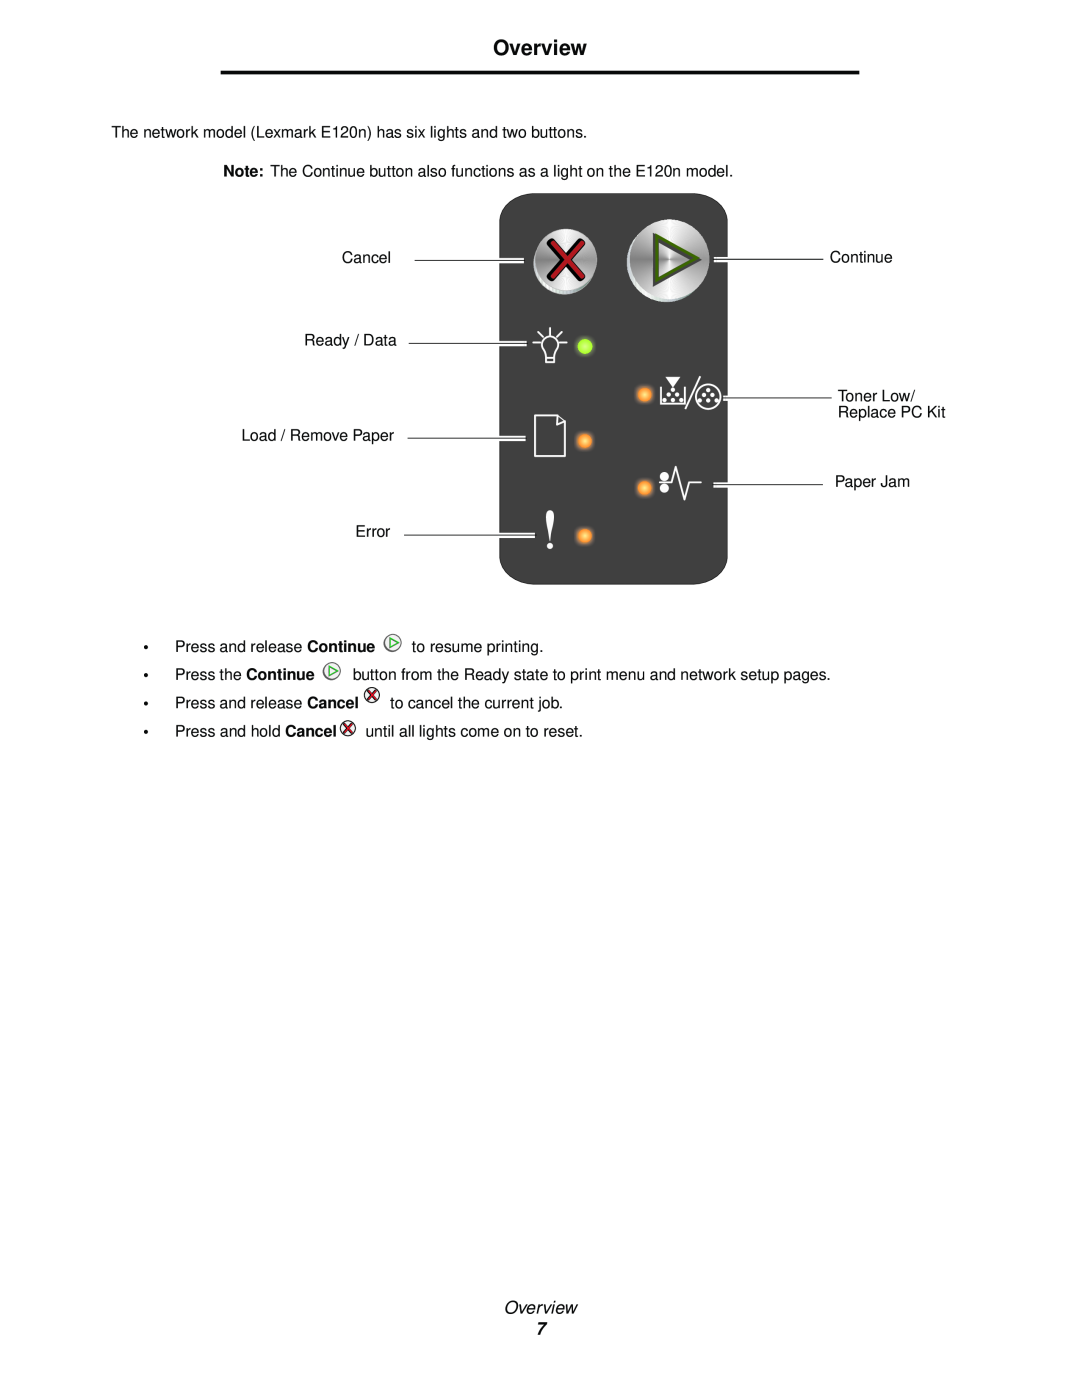 Lexmark manual Overview, The network model Lexmark E120n has six lights and two buttons 